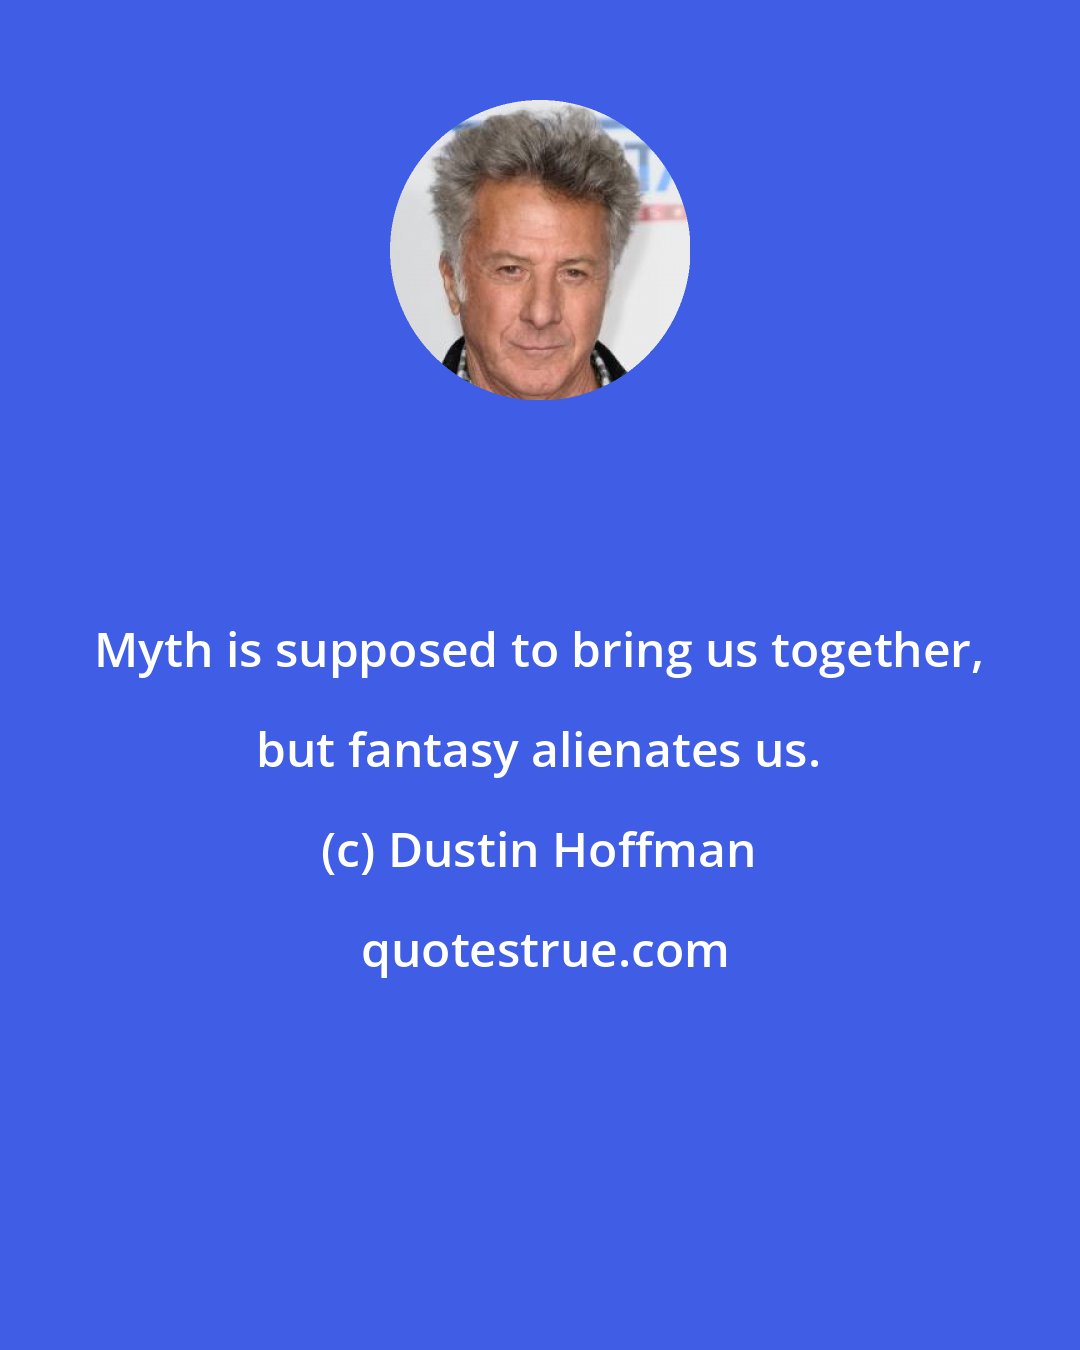 Dustin Hoffman: Myth is supposed to bring us together, but fantasy alienates us.